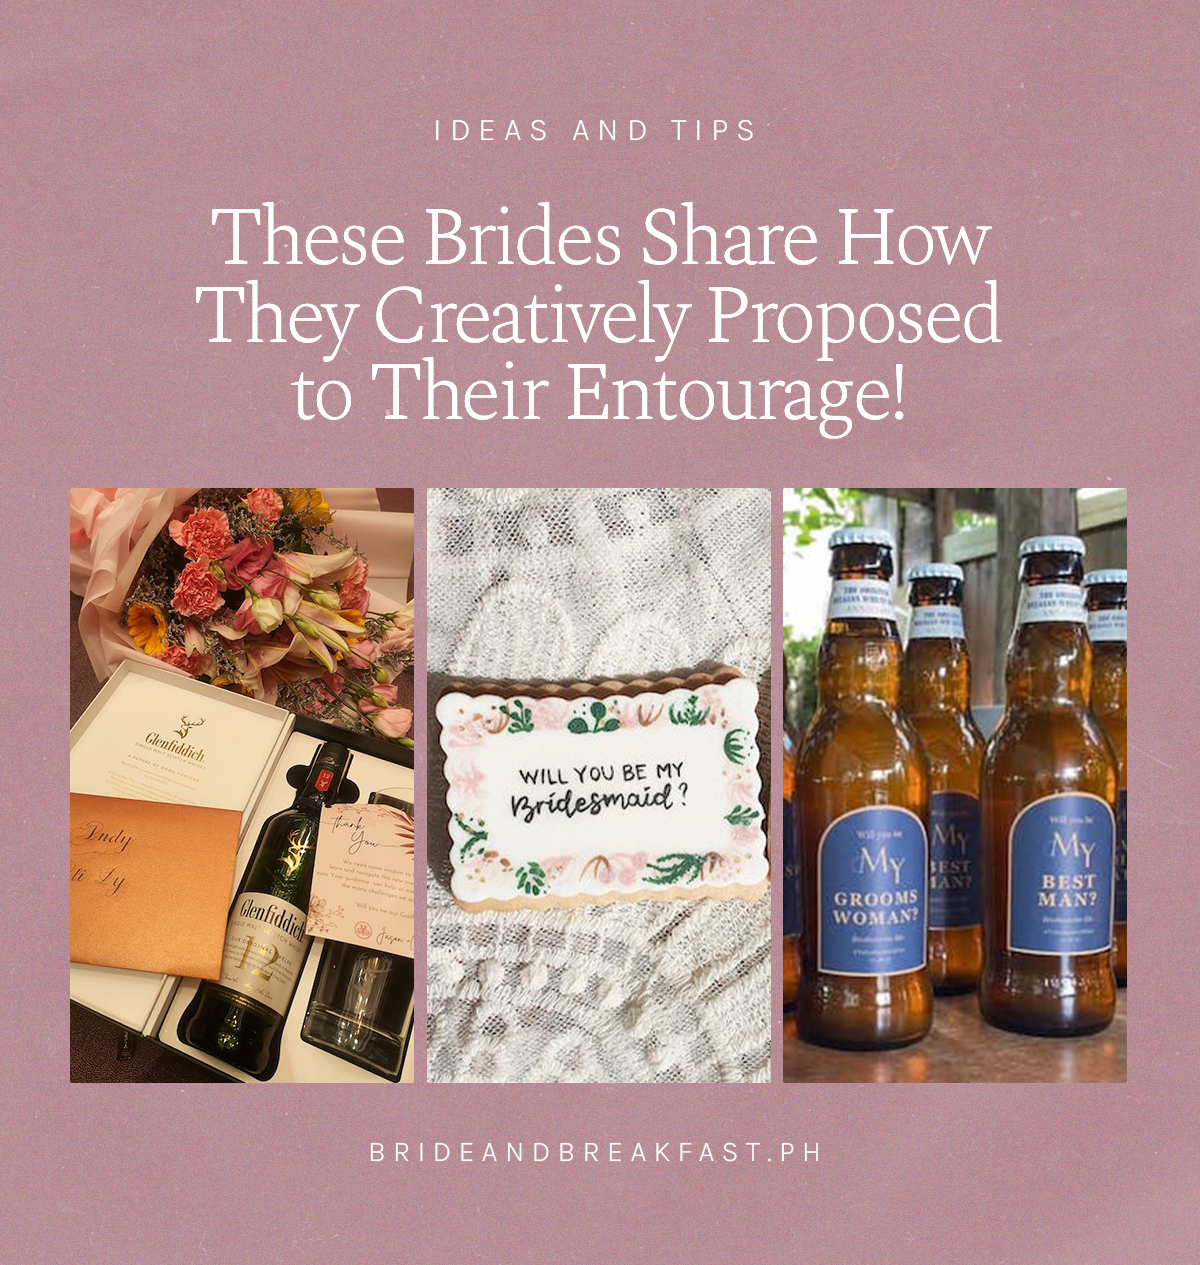 These Brides Share How They Creatively Proposed to Their Entourage